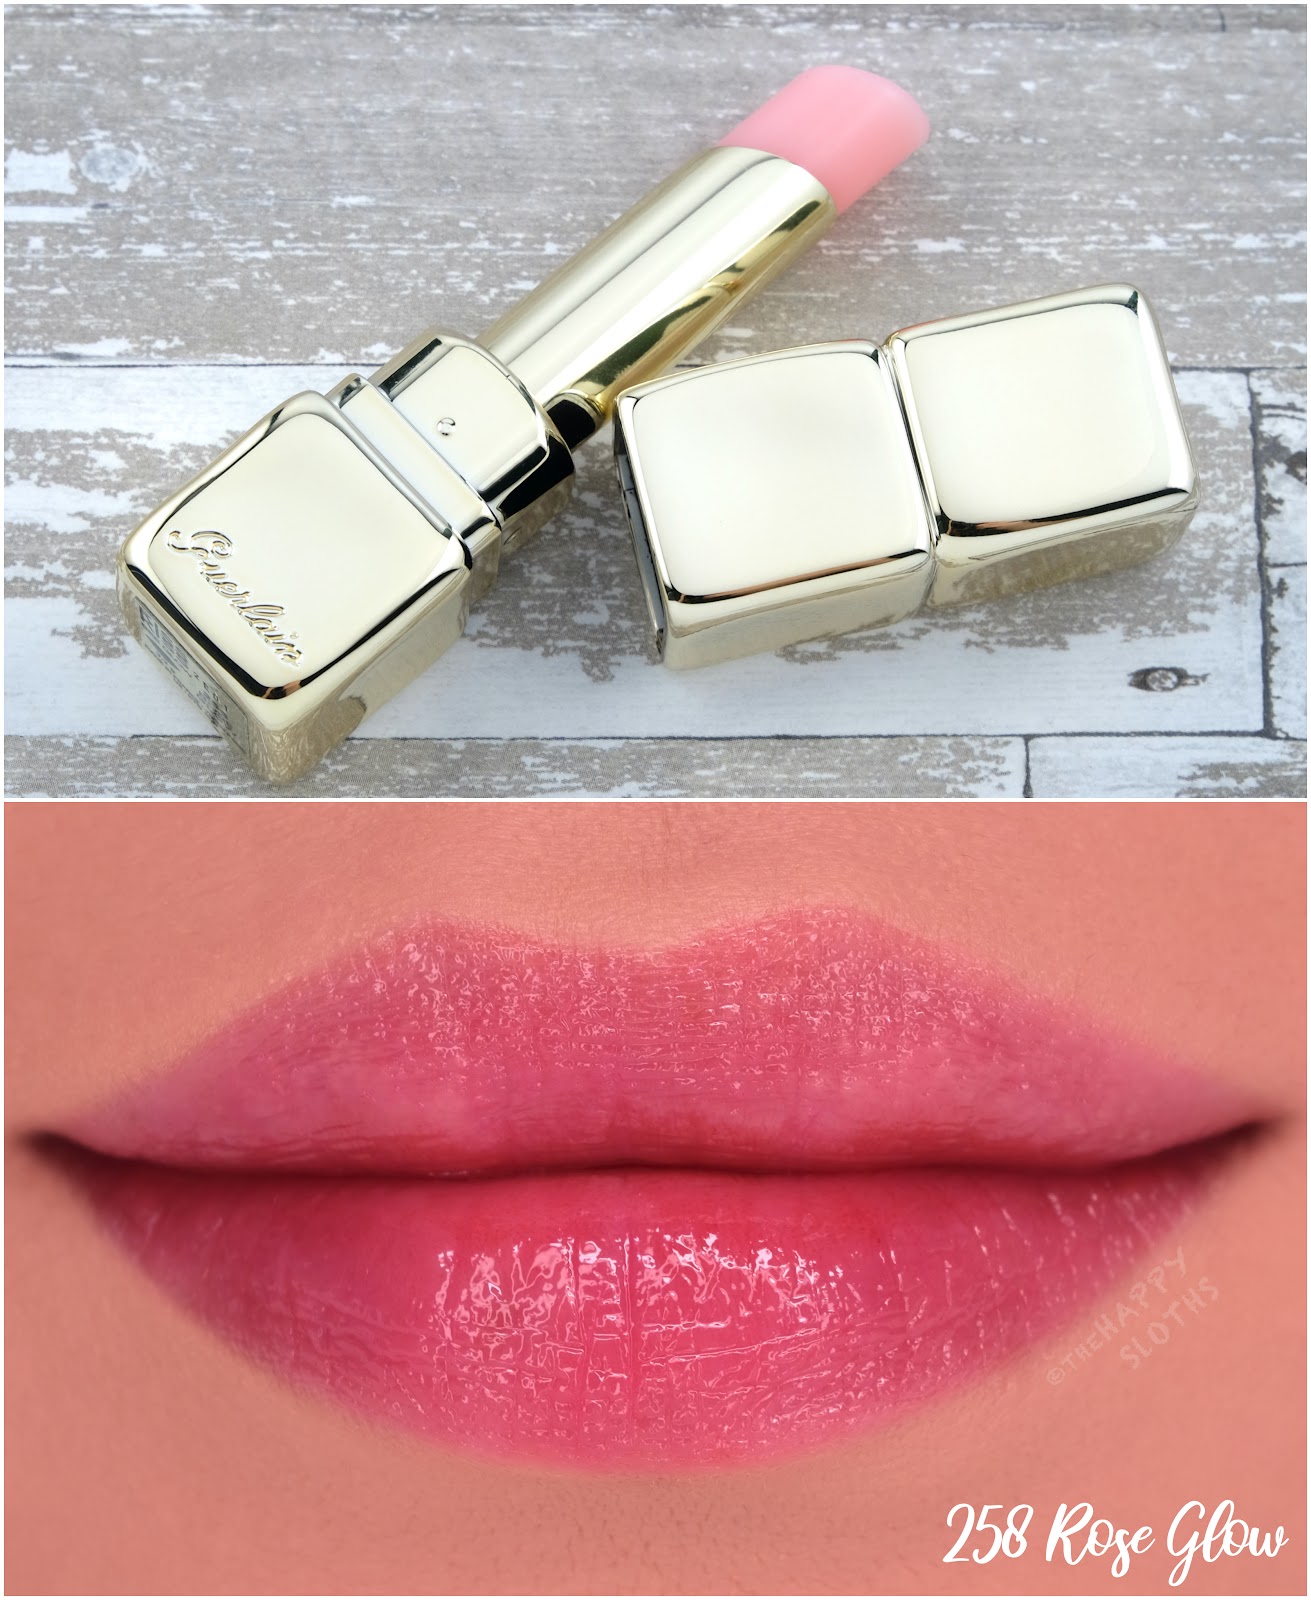 Guerlain | KissKiss Bee Glow Lipstick Balm in "258 Rose Glow": Review and Swatches